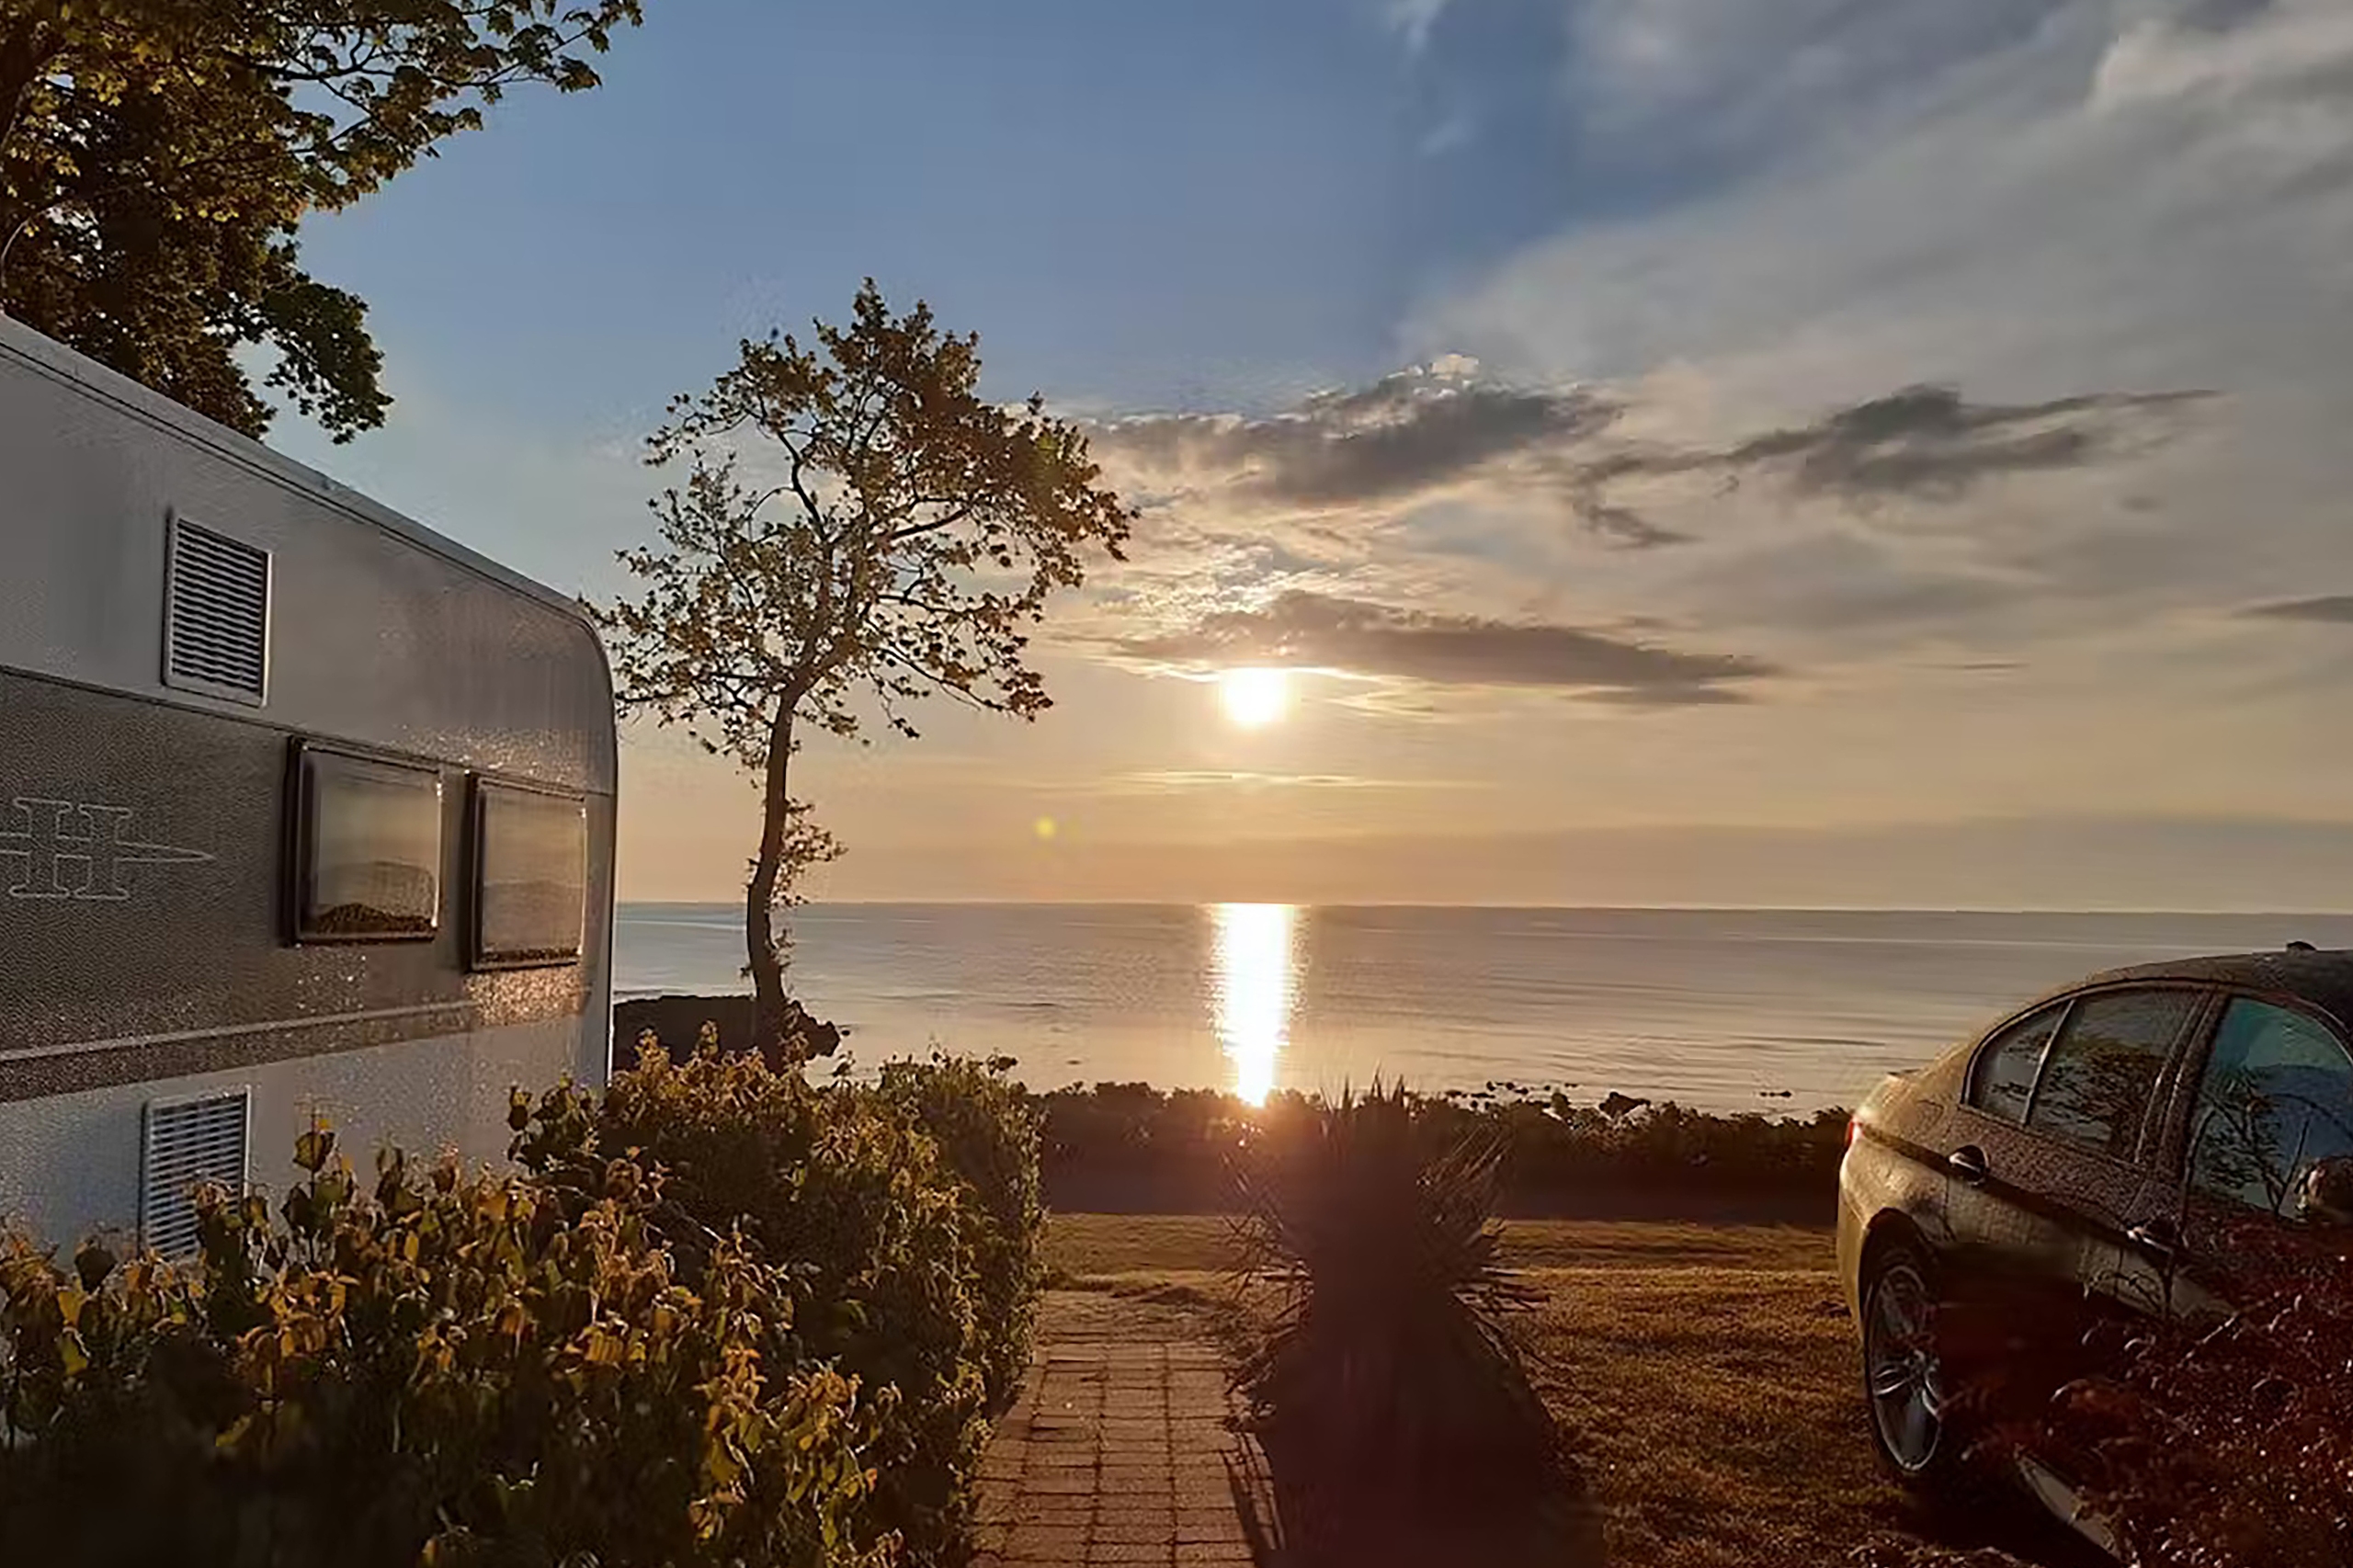 The view of the Baltic Sea is a special highlight at this Bornholm campsite.